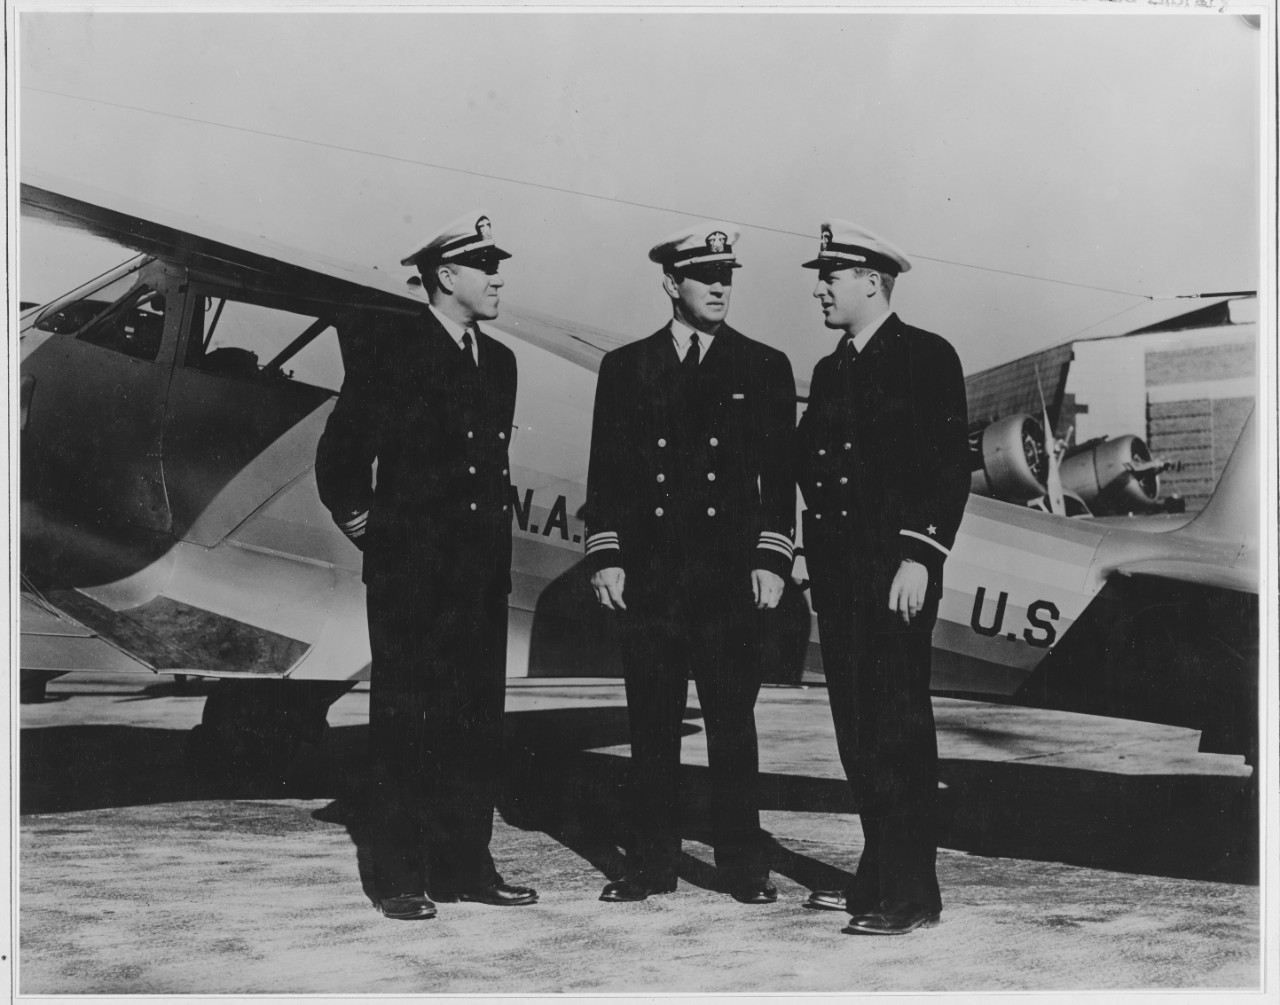 Comdr E.W. Mahan, Lt-Comdr J.J. Tunney and Ens J W Stack Tr. At the New Naval Air Station Pensacola Fla.